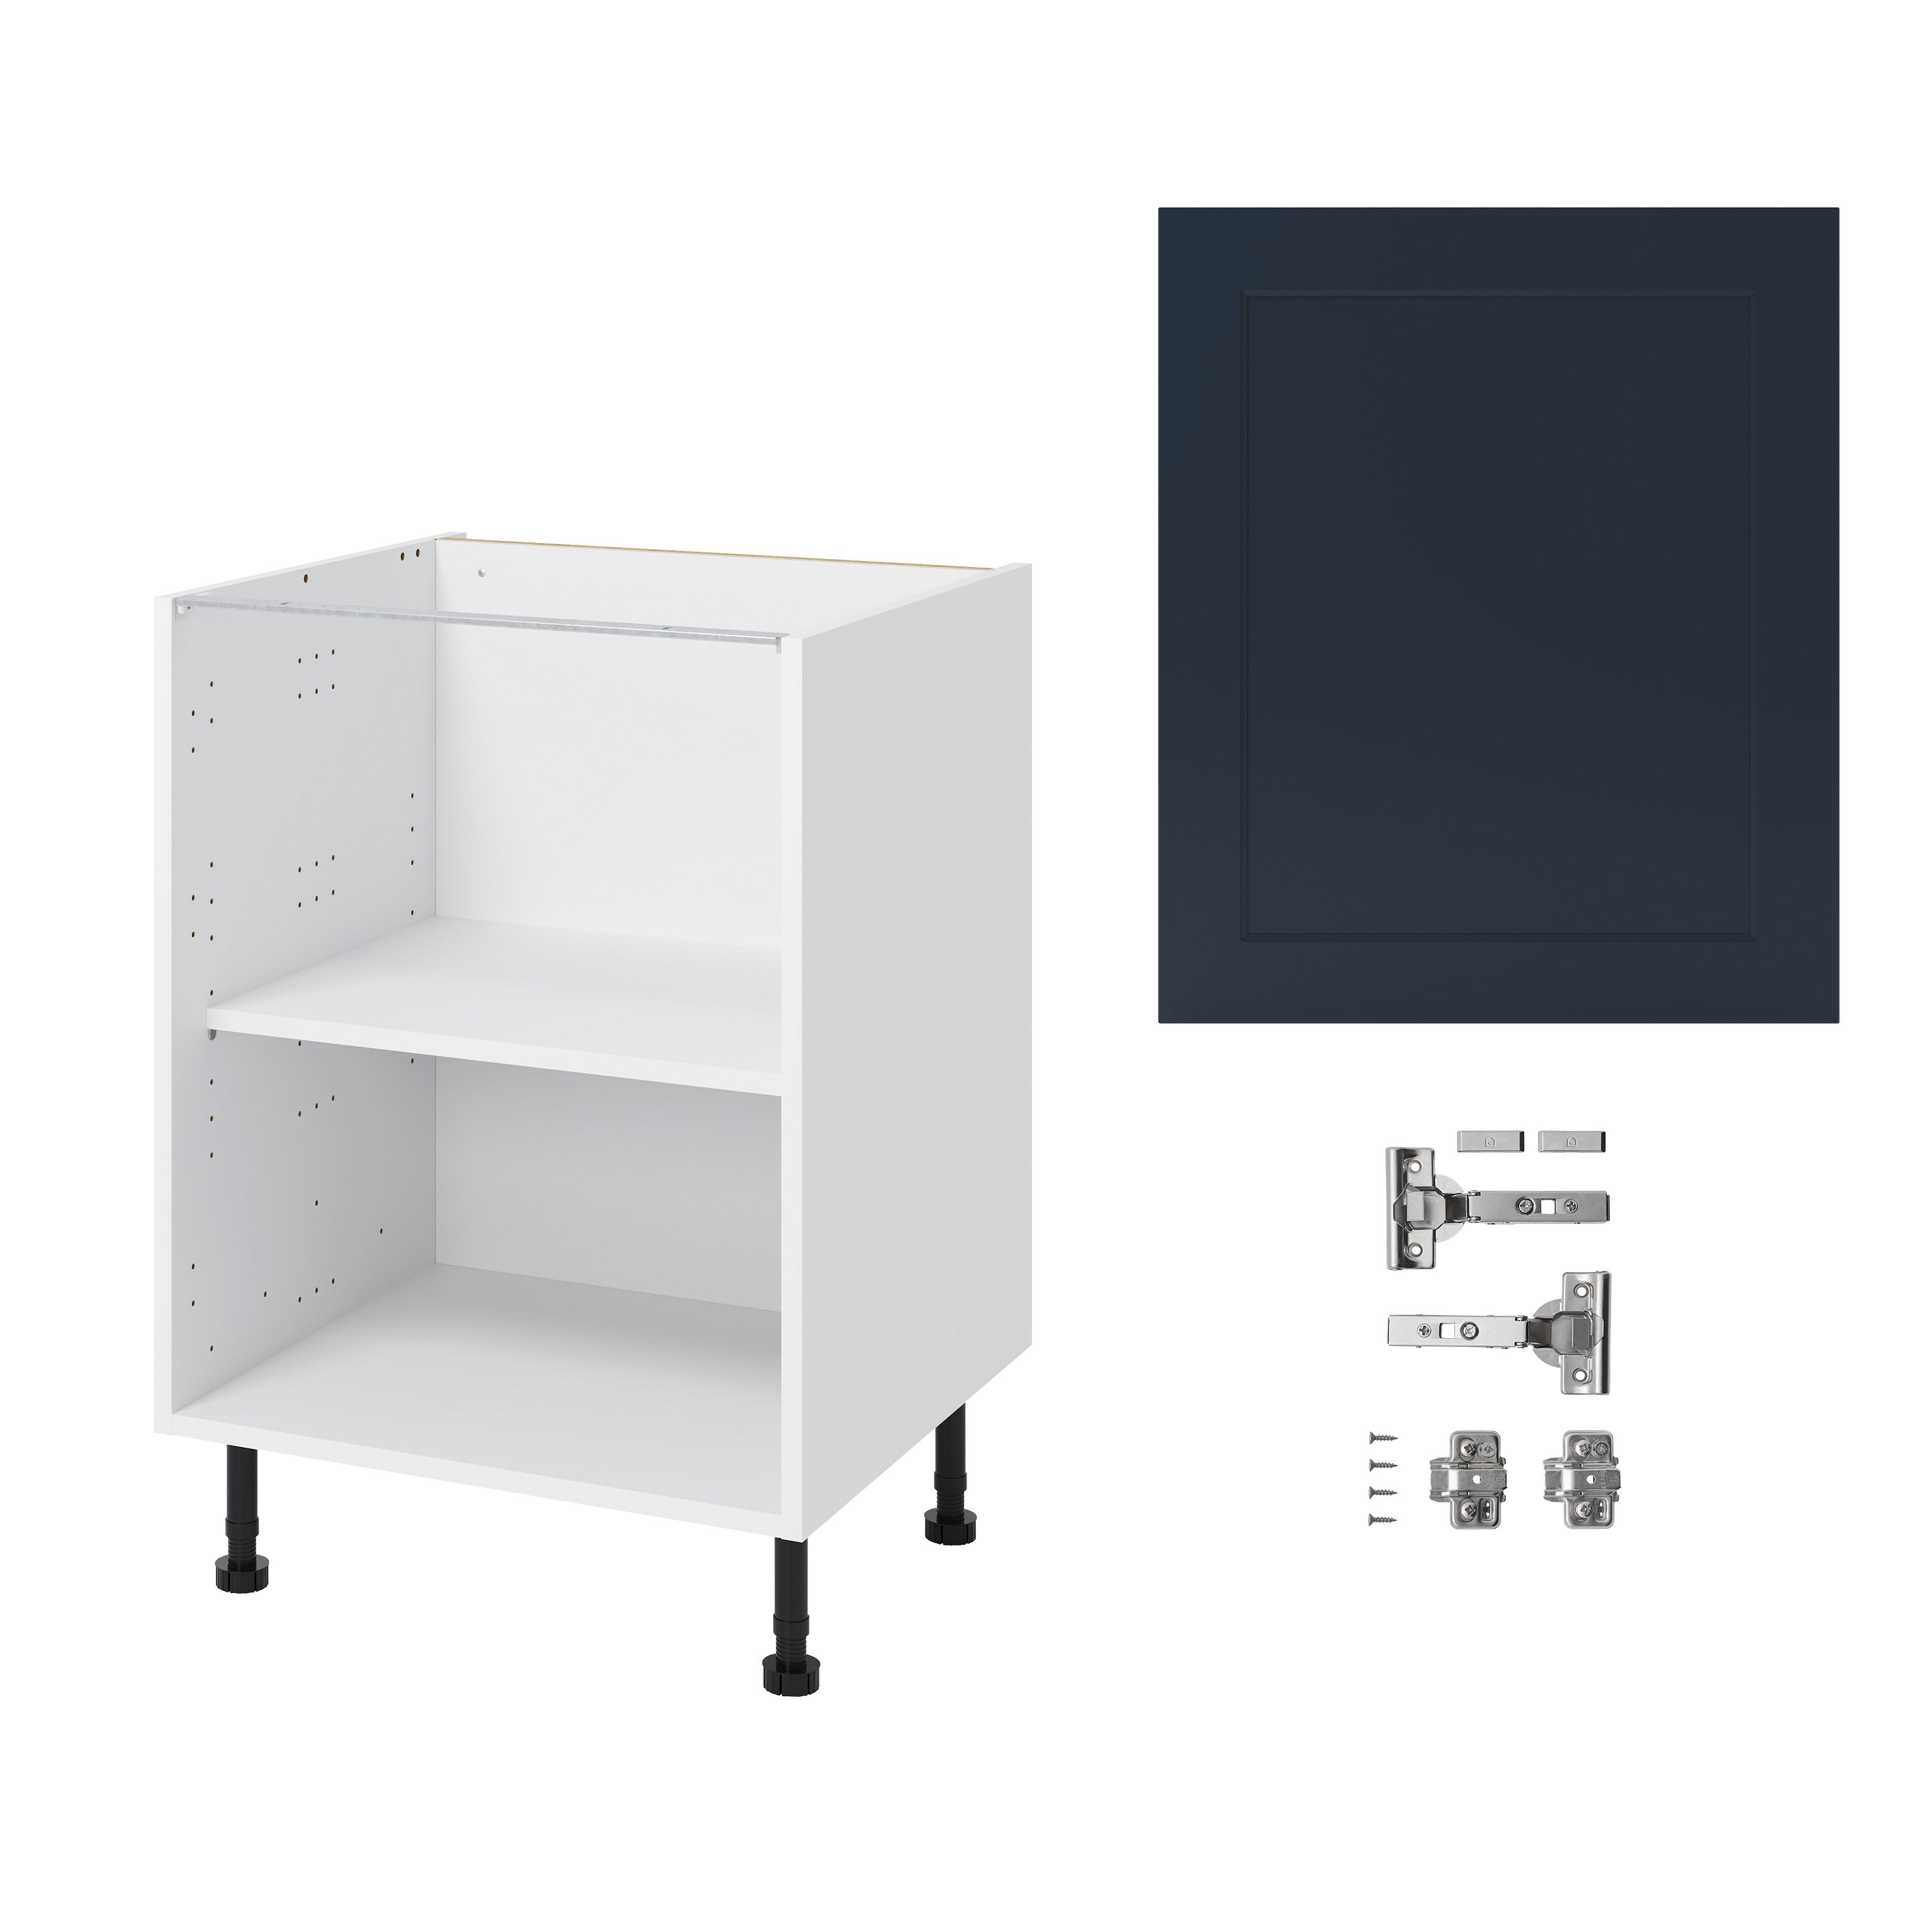 GoodHome Artemisia Midnight blue classic shaker Base Kitchen cabinet (W)600mm (H)720mm